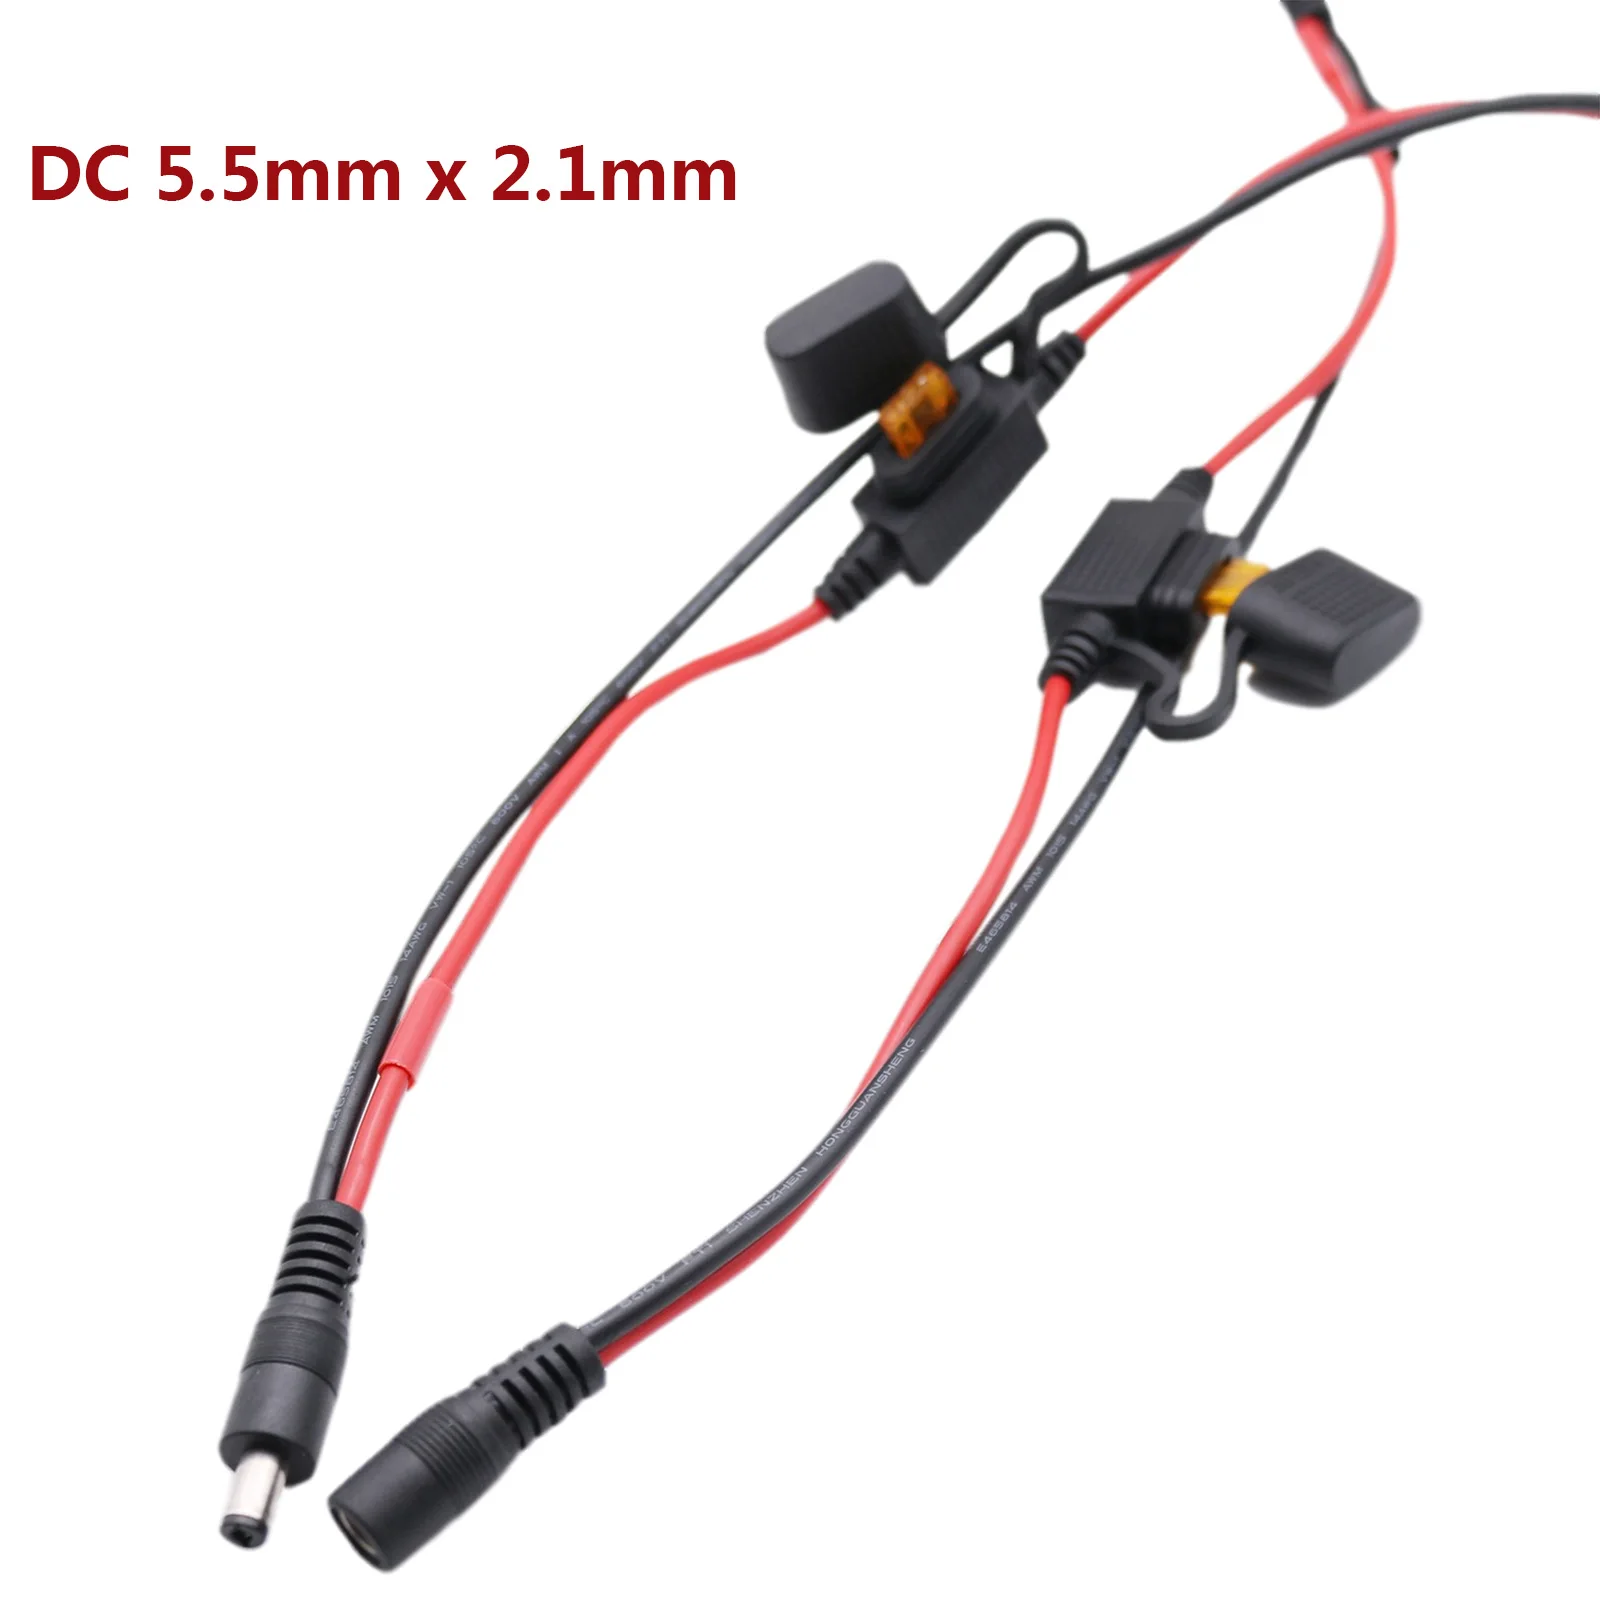 DC 5.5mm/2.1mm External Power Cable with 10amps fuse for TOPCON GPS Power 